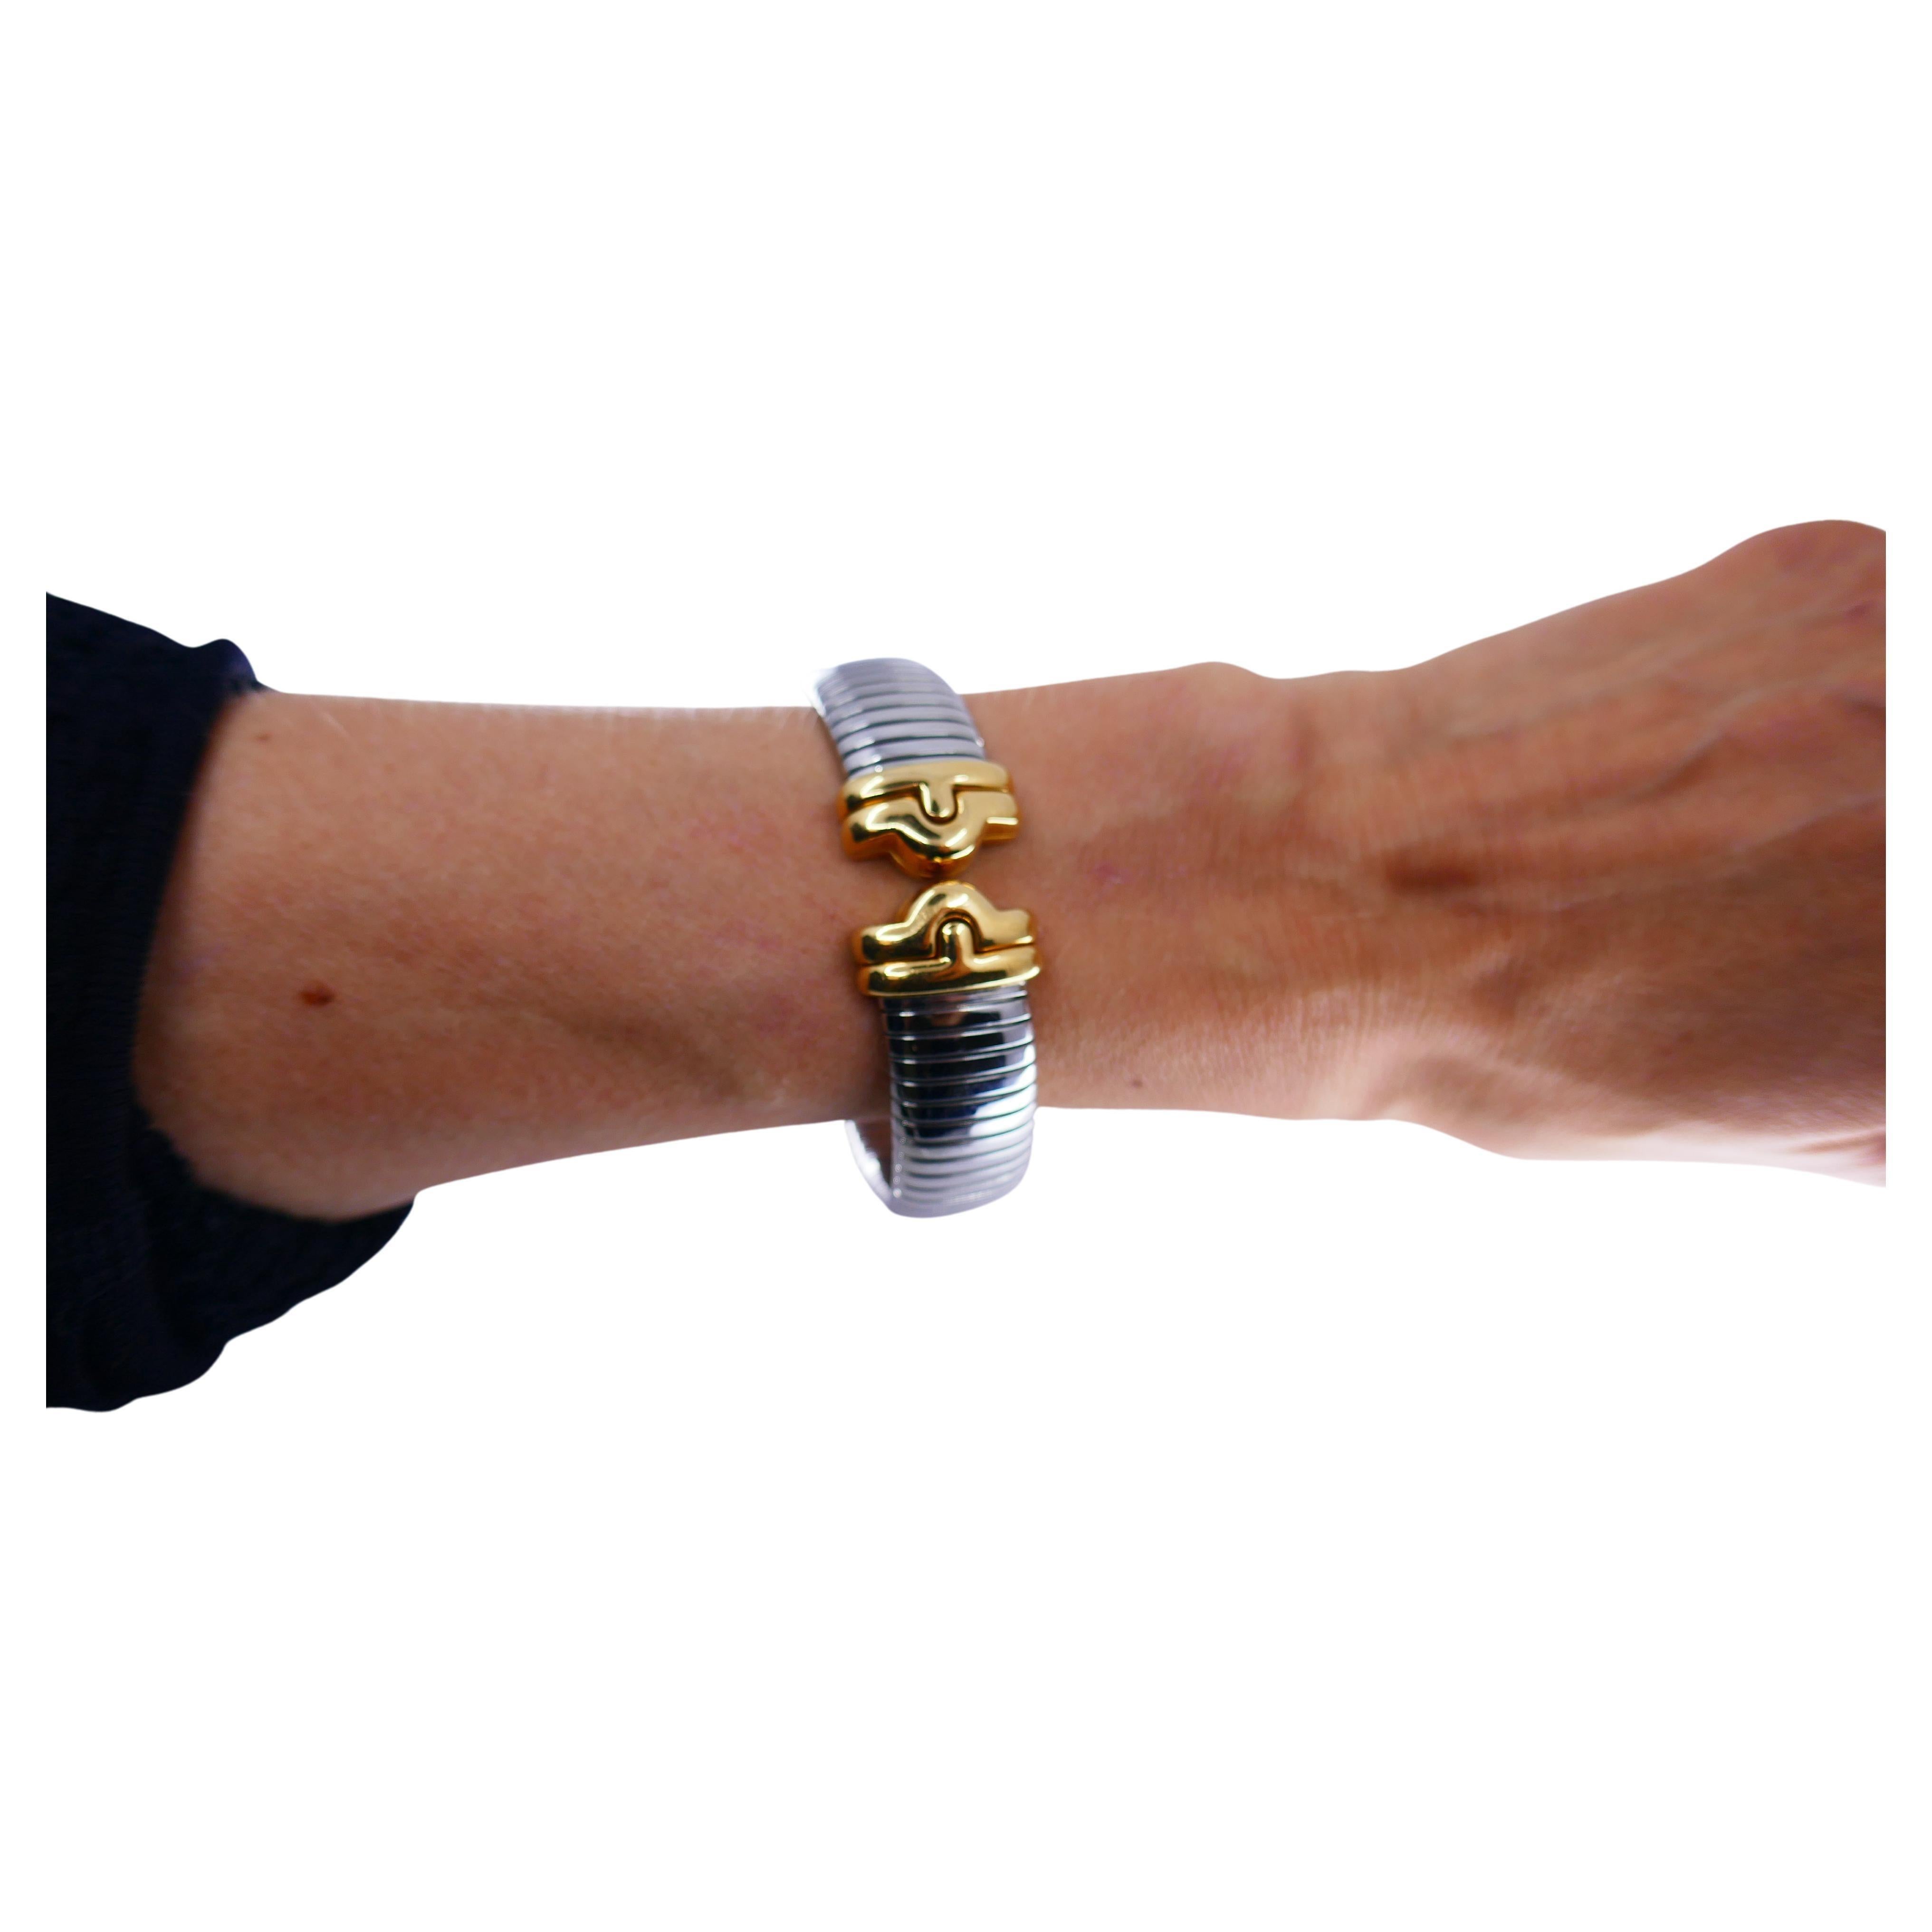 An amazing Bulgari Tubogas bracelet made of stainless steel and 18k gold. Belongs to Bulgari Parentesi collection.
The body is stainless steel. Gold ends of the bracelet are geometrical Parentesi pattern,
The combo of the white sparkly steel and